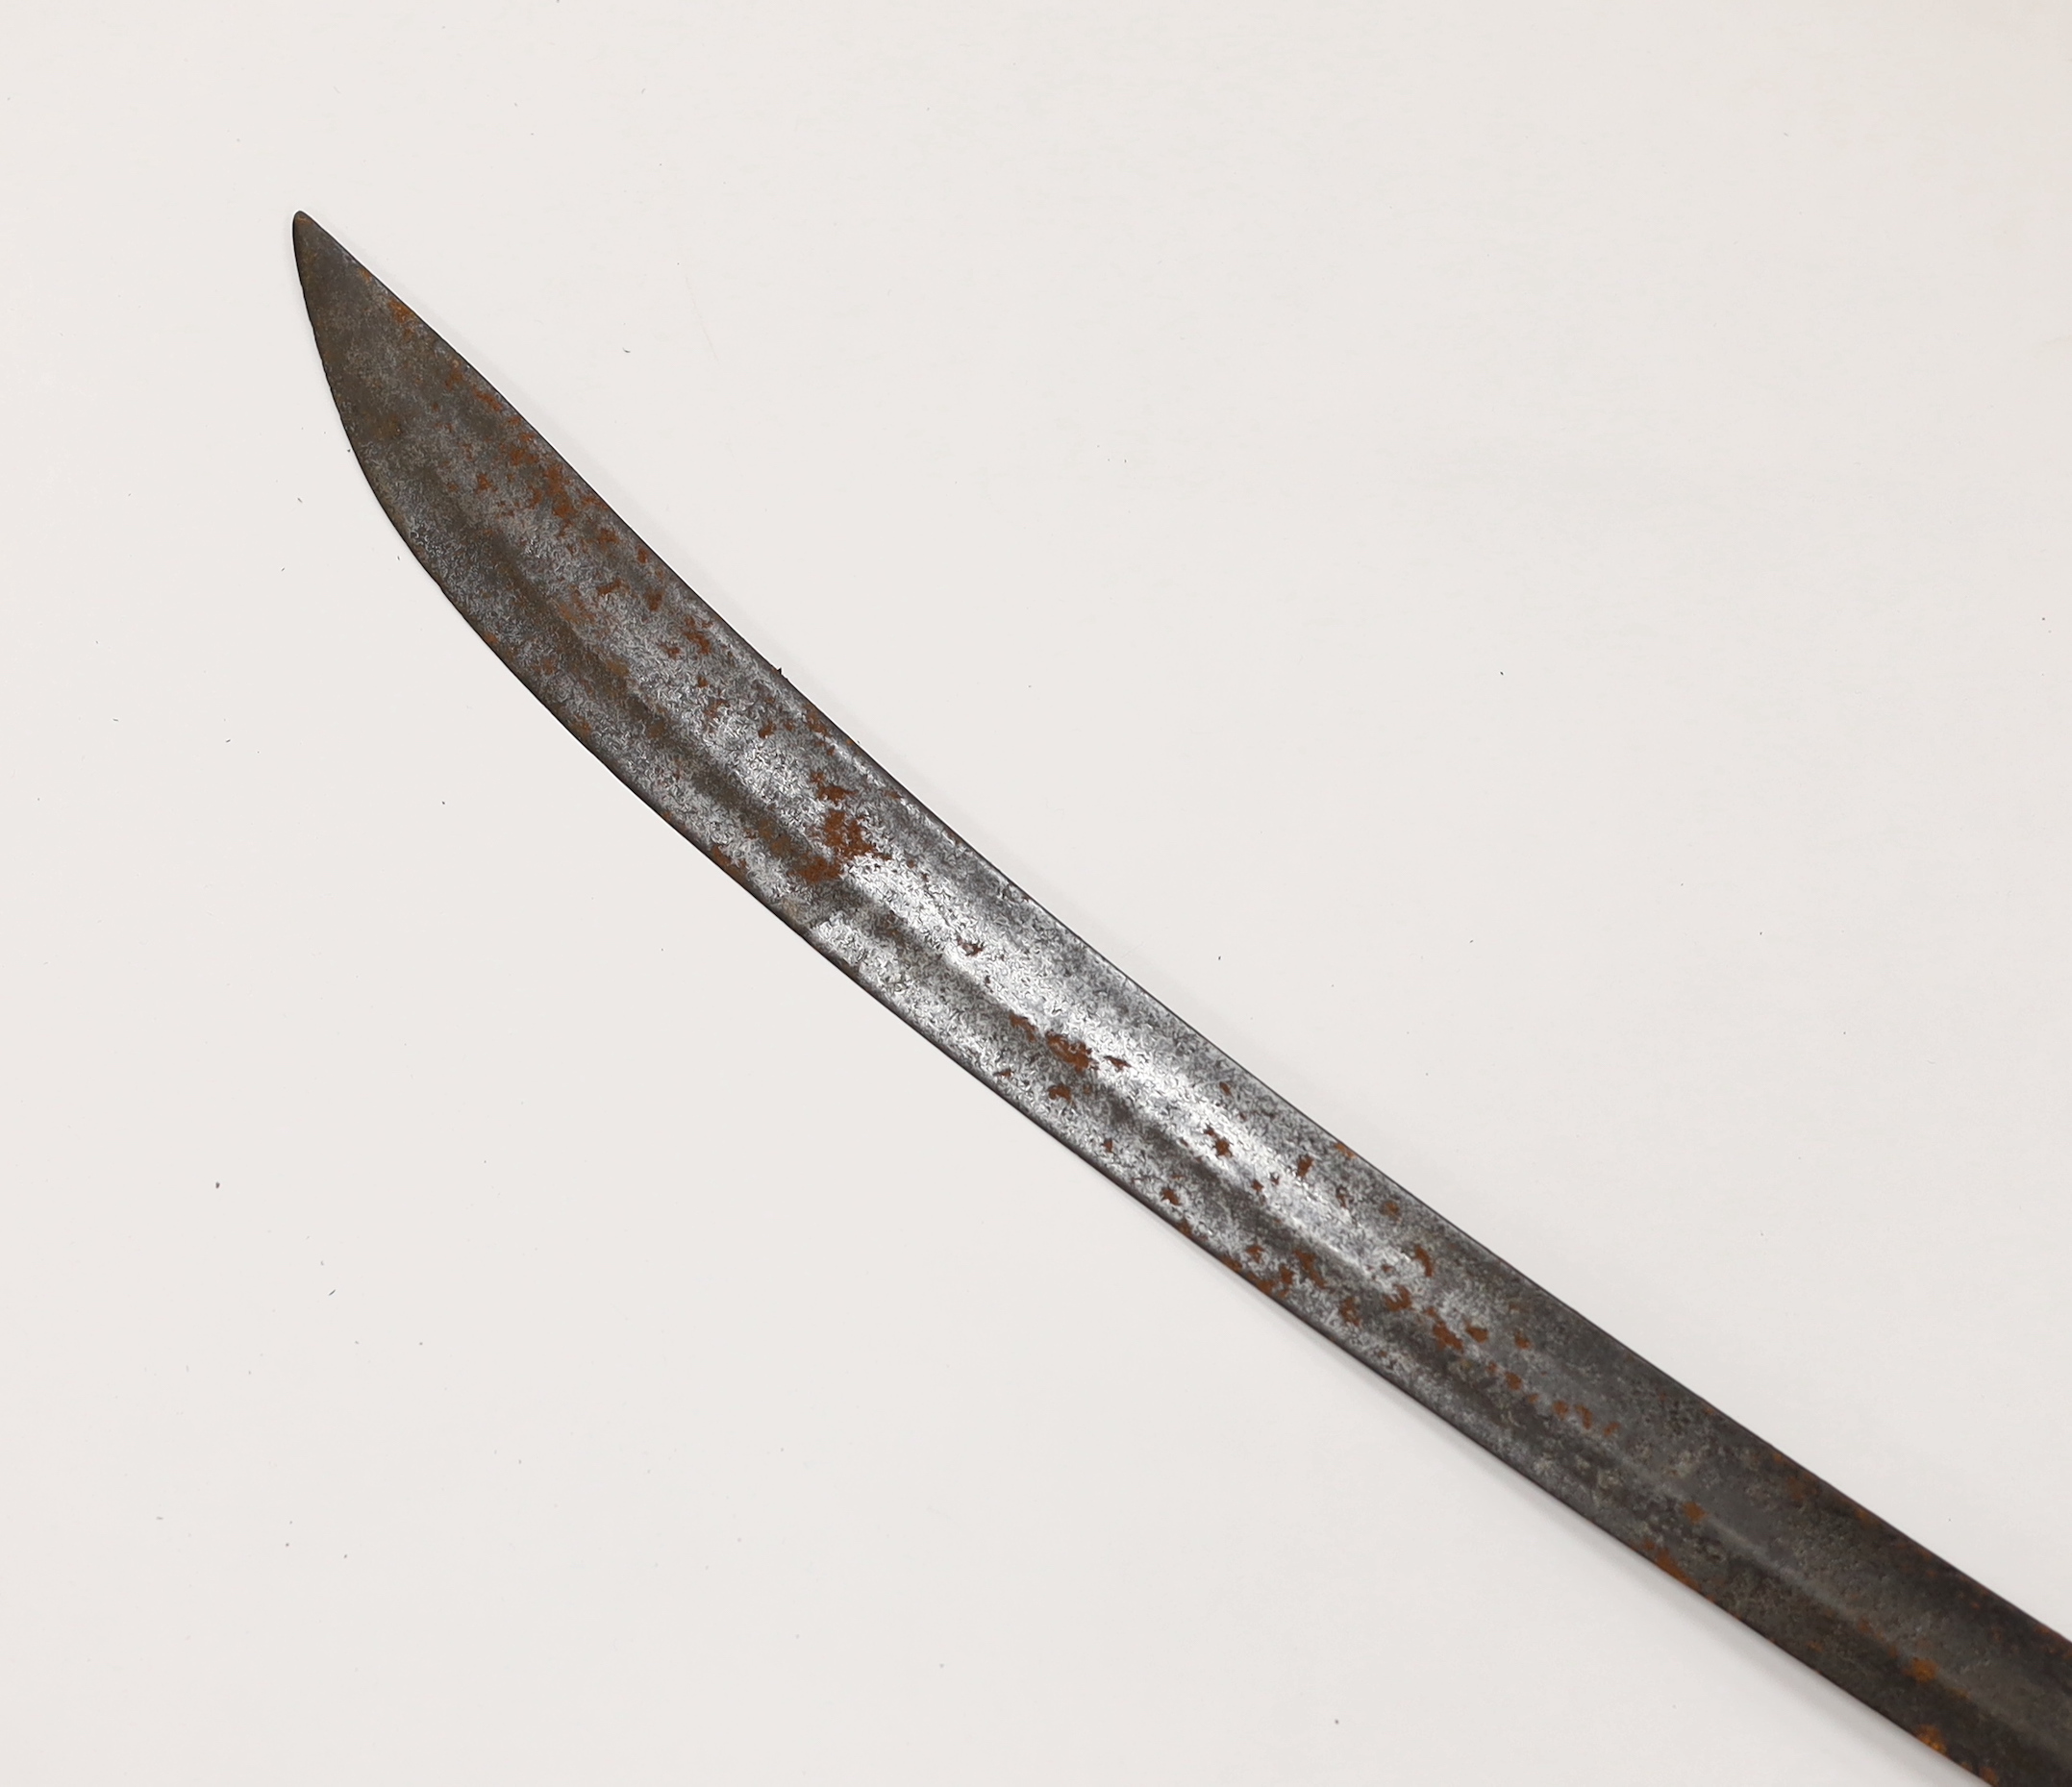 An English hangar, mid 17th century, curved fullered blade engraved with spurious date 1535 and running wolf mark, iron guard slightly reduced and swollen pommel, spirally carved and chequered bone grip, blade 67.5cm